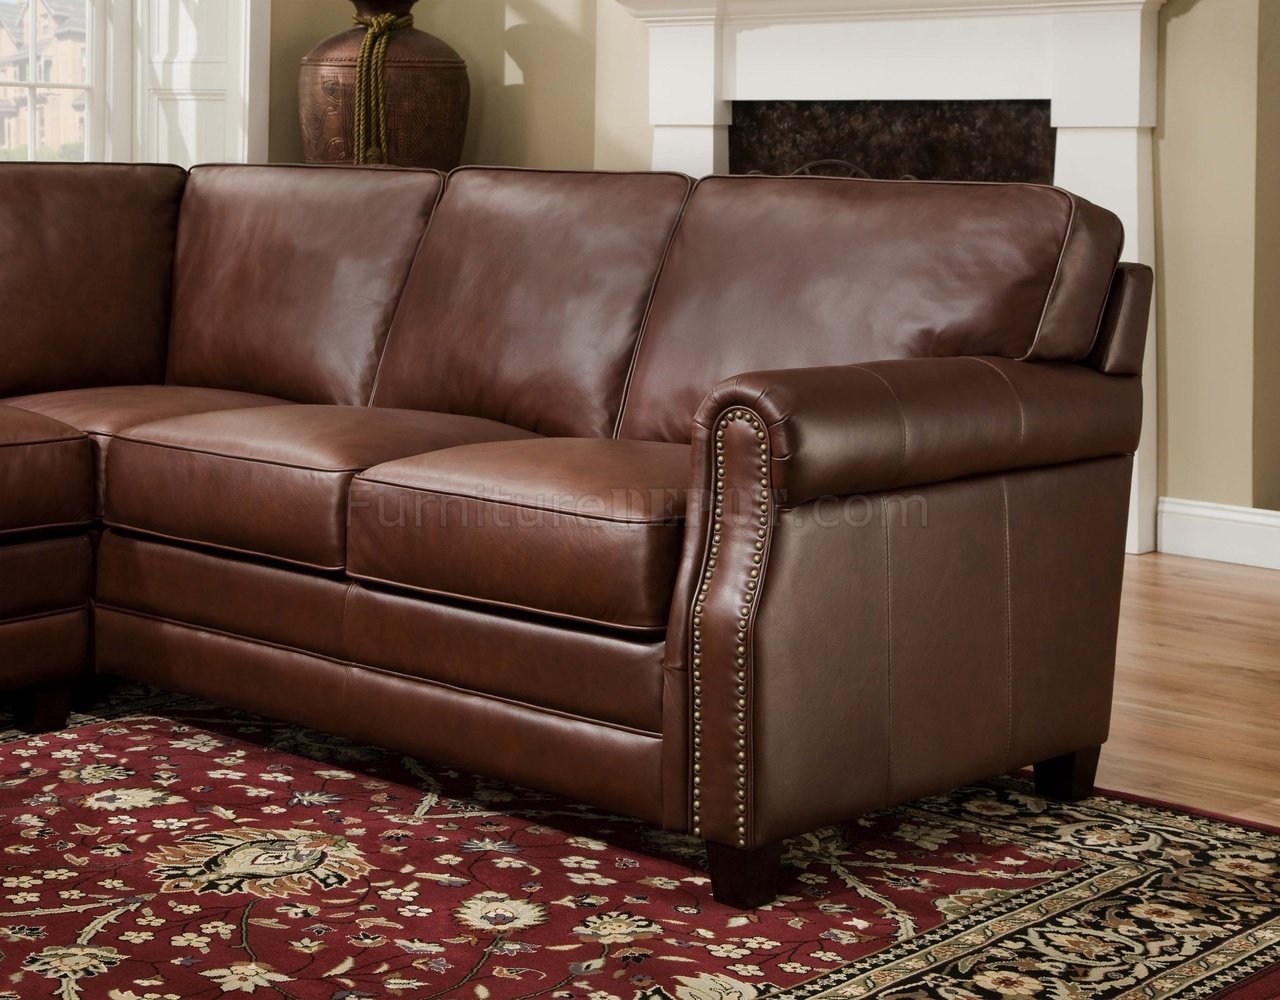 Cocoa Brown Top Grain Italian Leather, Traditional Leather Sectional